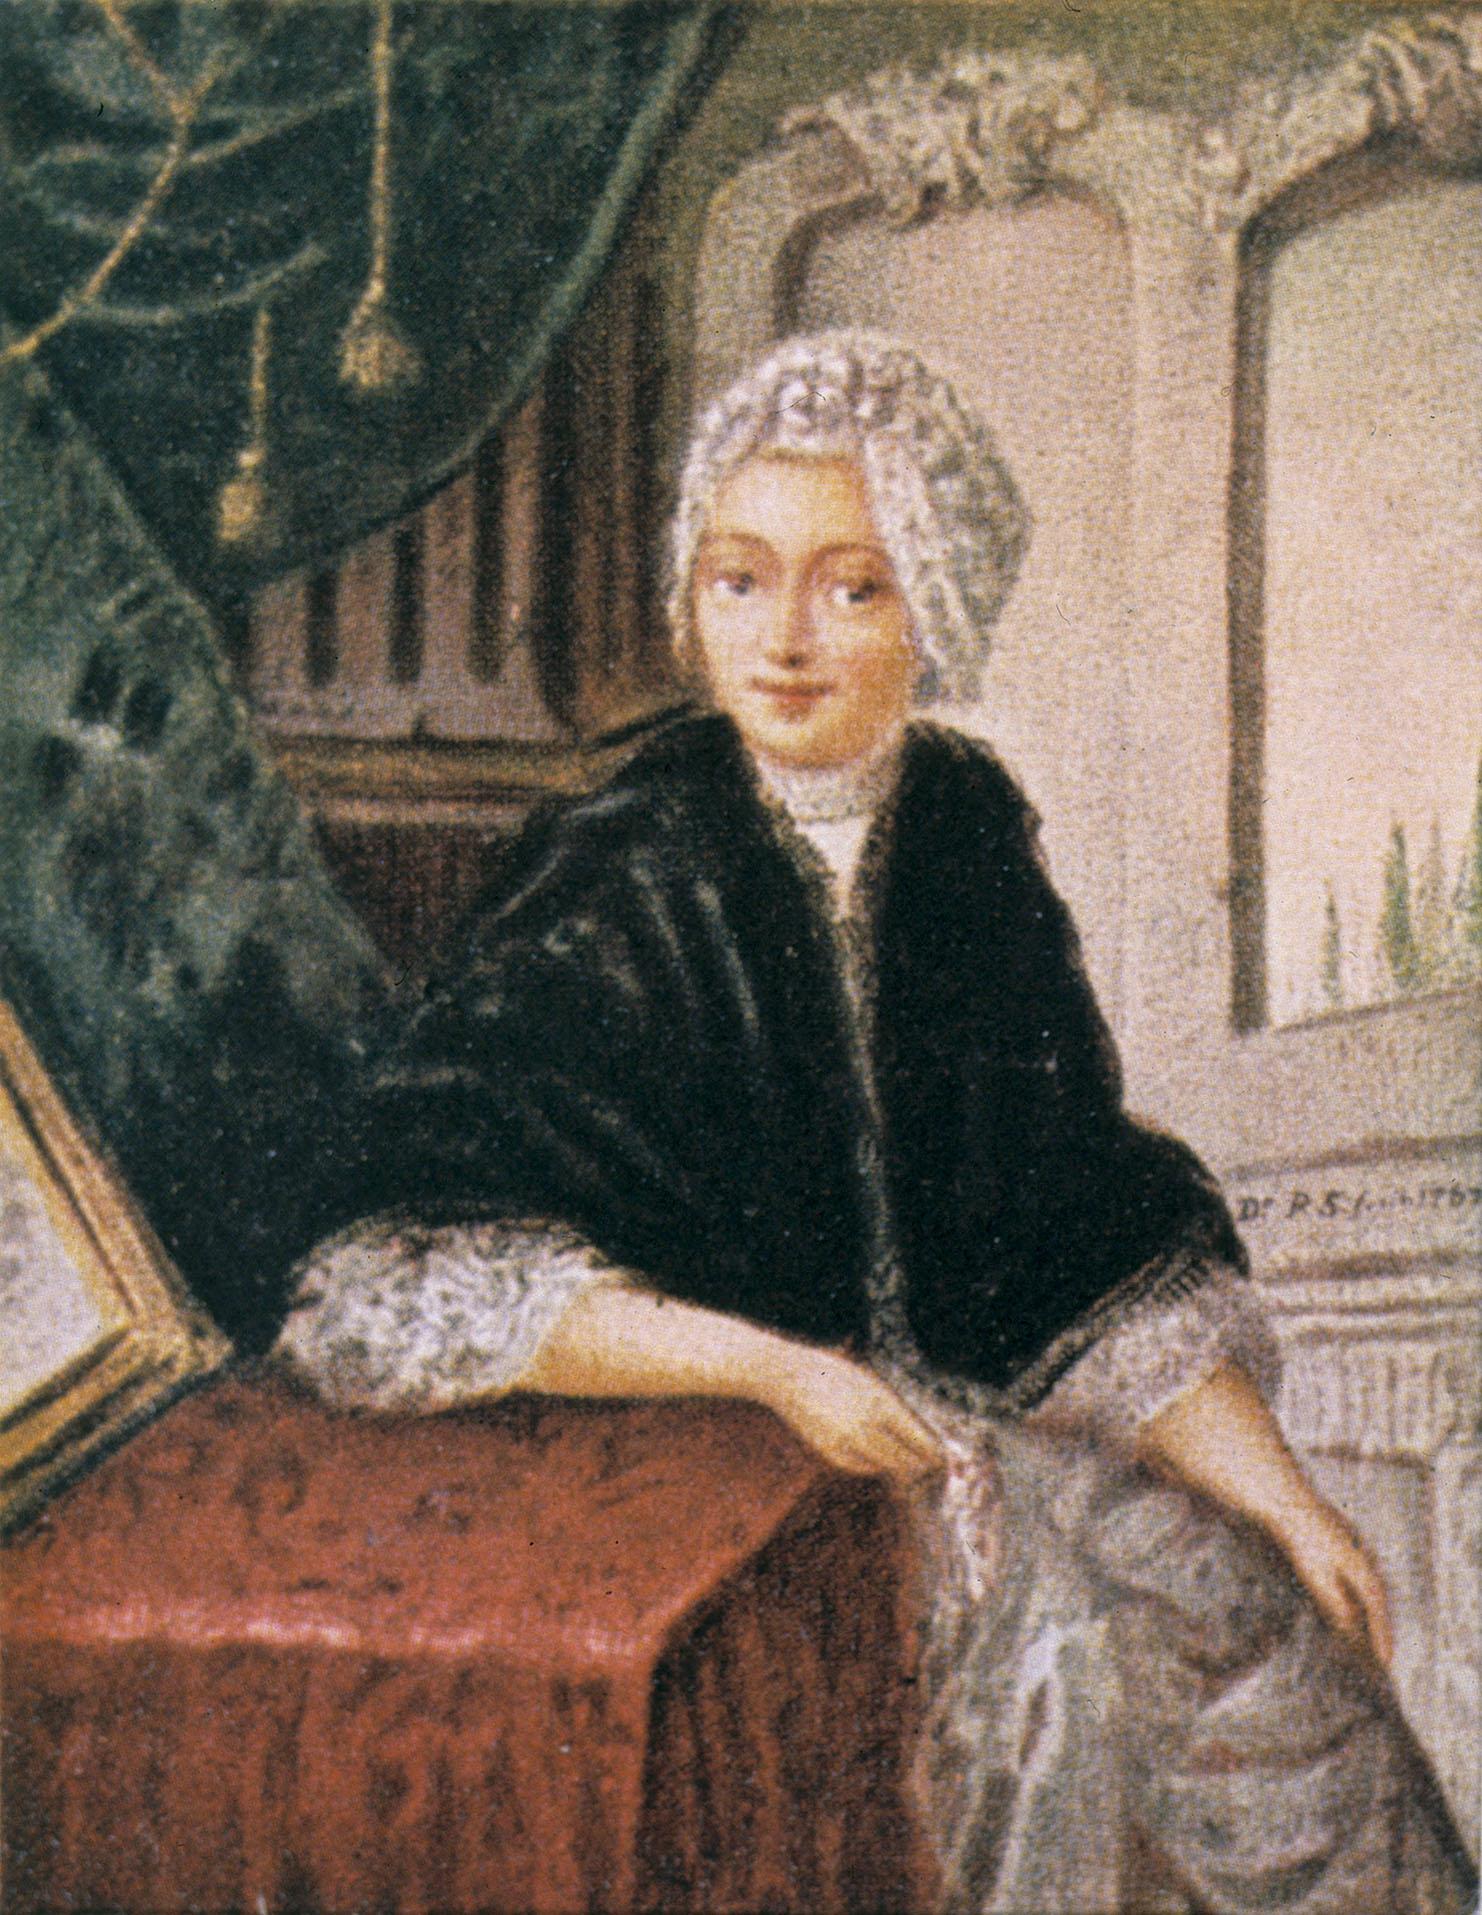 Image of seated woman in shawl with arm resting on a table with tablecloth.